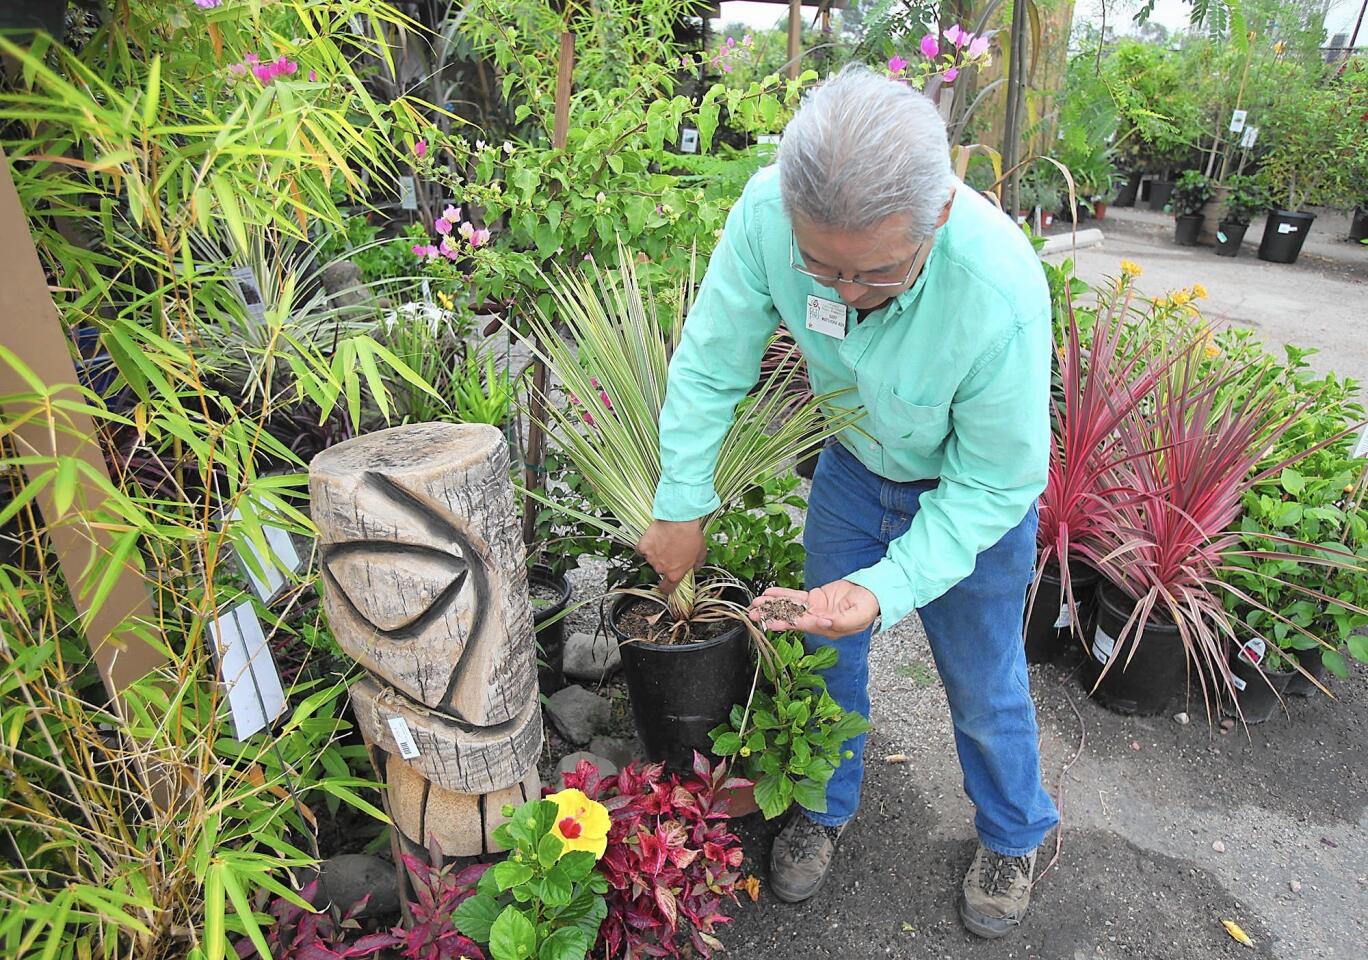 Gary Matsuoka talks about the soil he mixes at the Laguna Hills Nursery in Santa Ana. Matsuoka educates customers at the store and at local farmers markets about fruit trees, berries, herbs and other edibles grown from his own mix of soil.